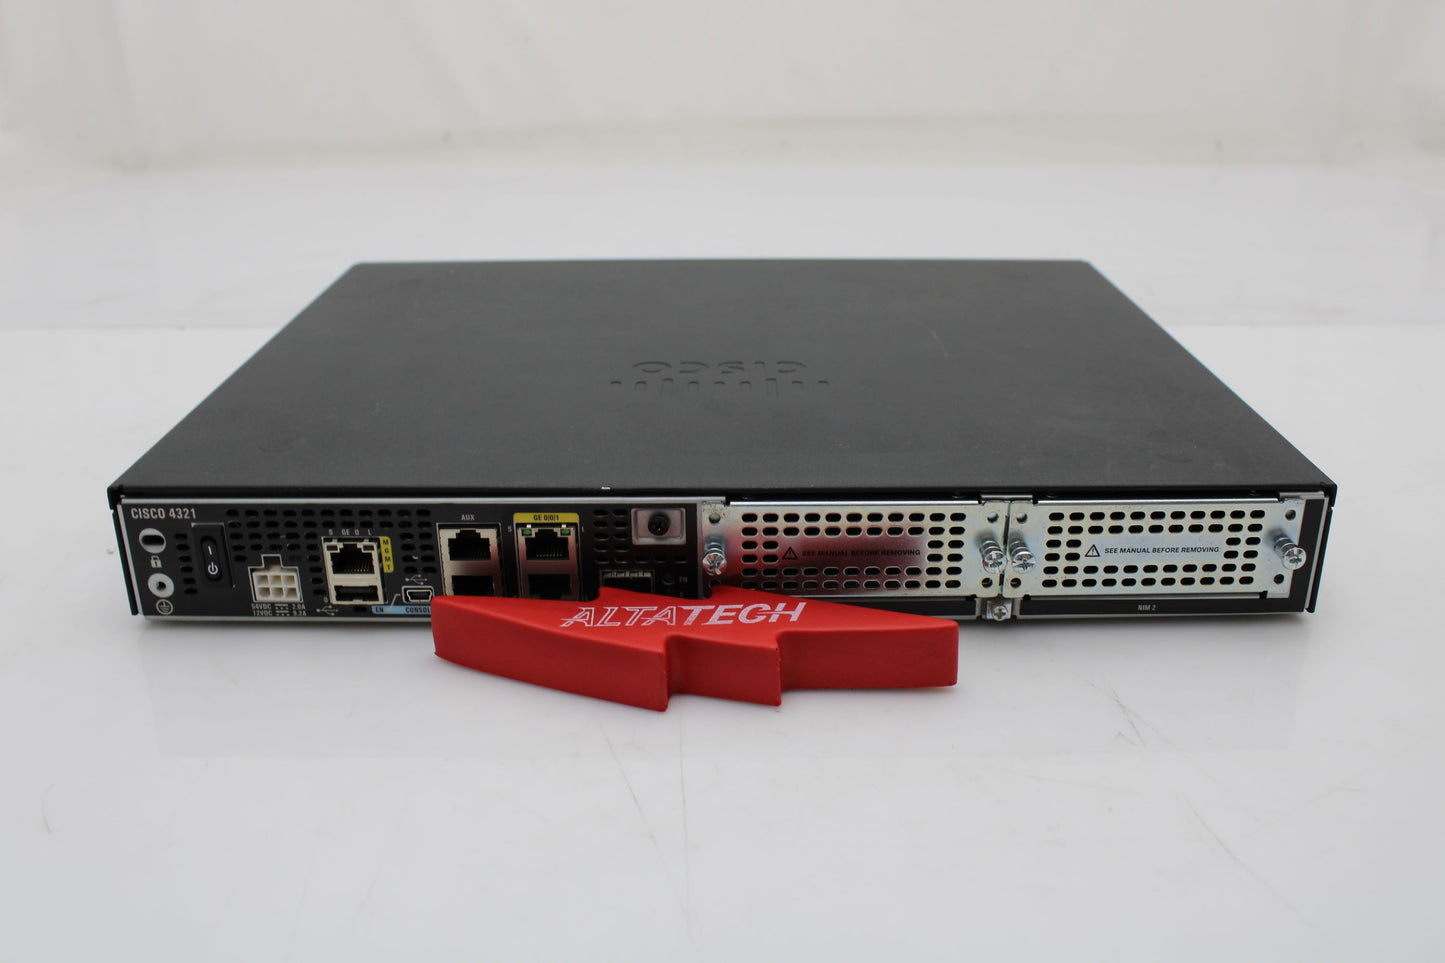 Cisco ISR4321/K9 ISR4321/K9 Cisco 4321 Integrated Services Router, Used